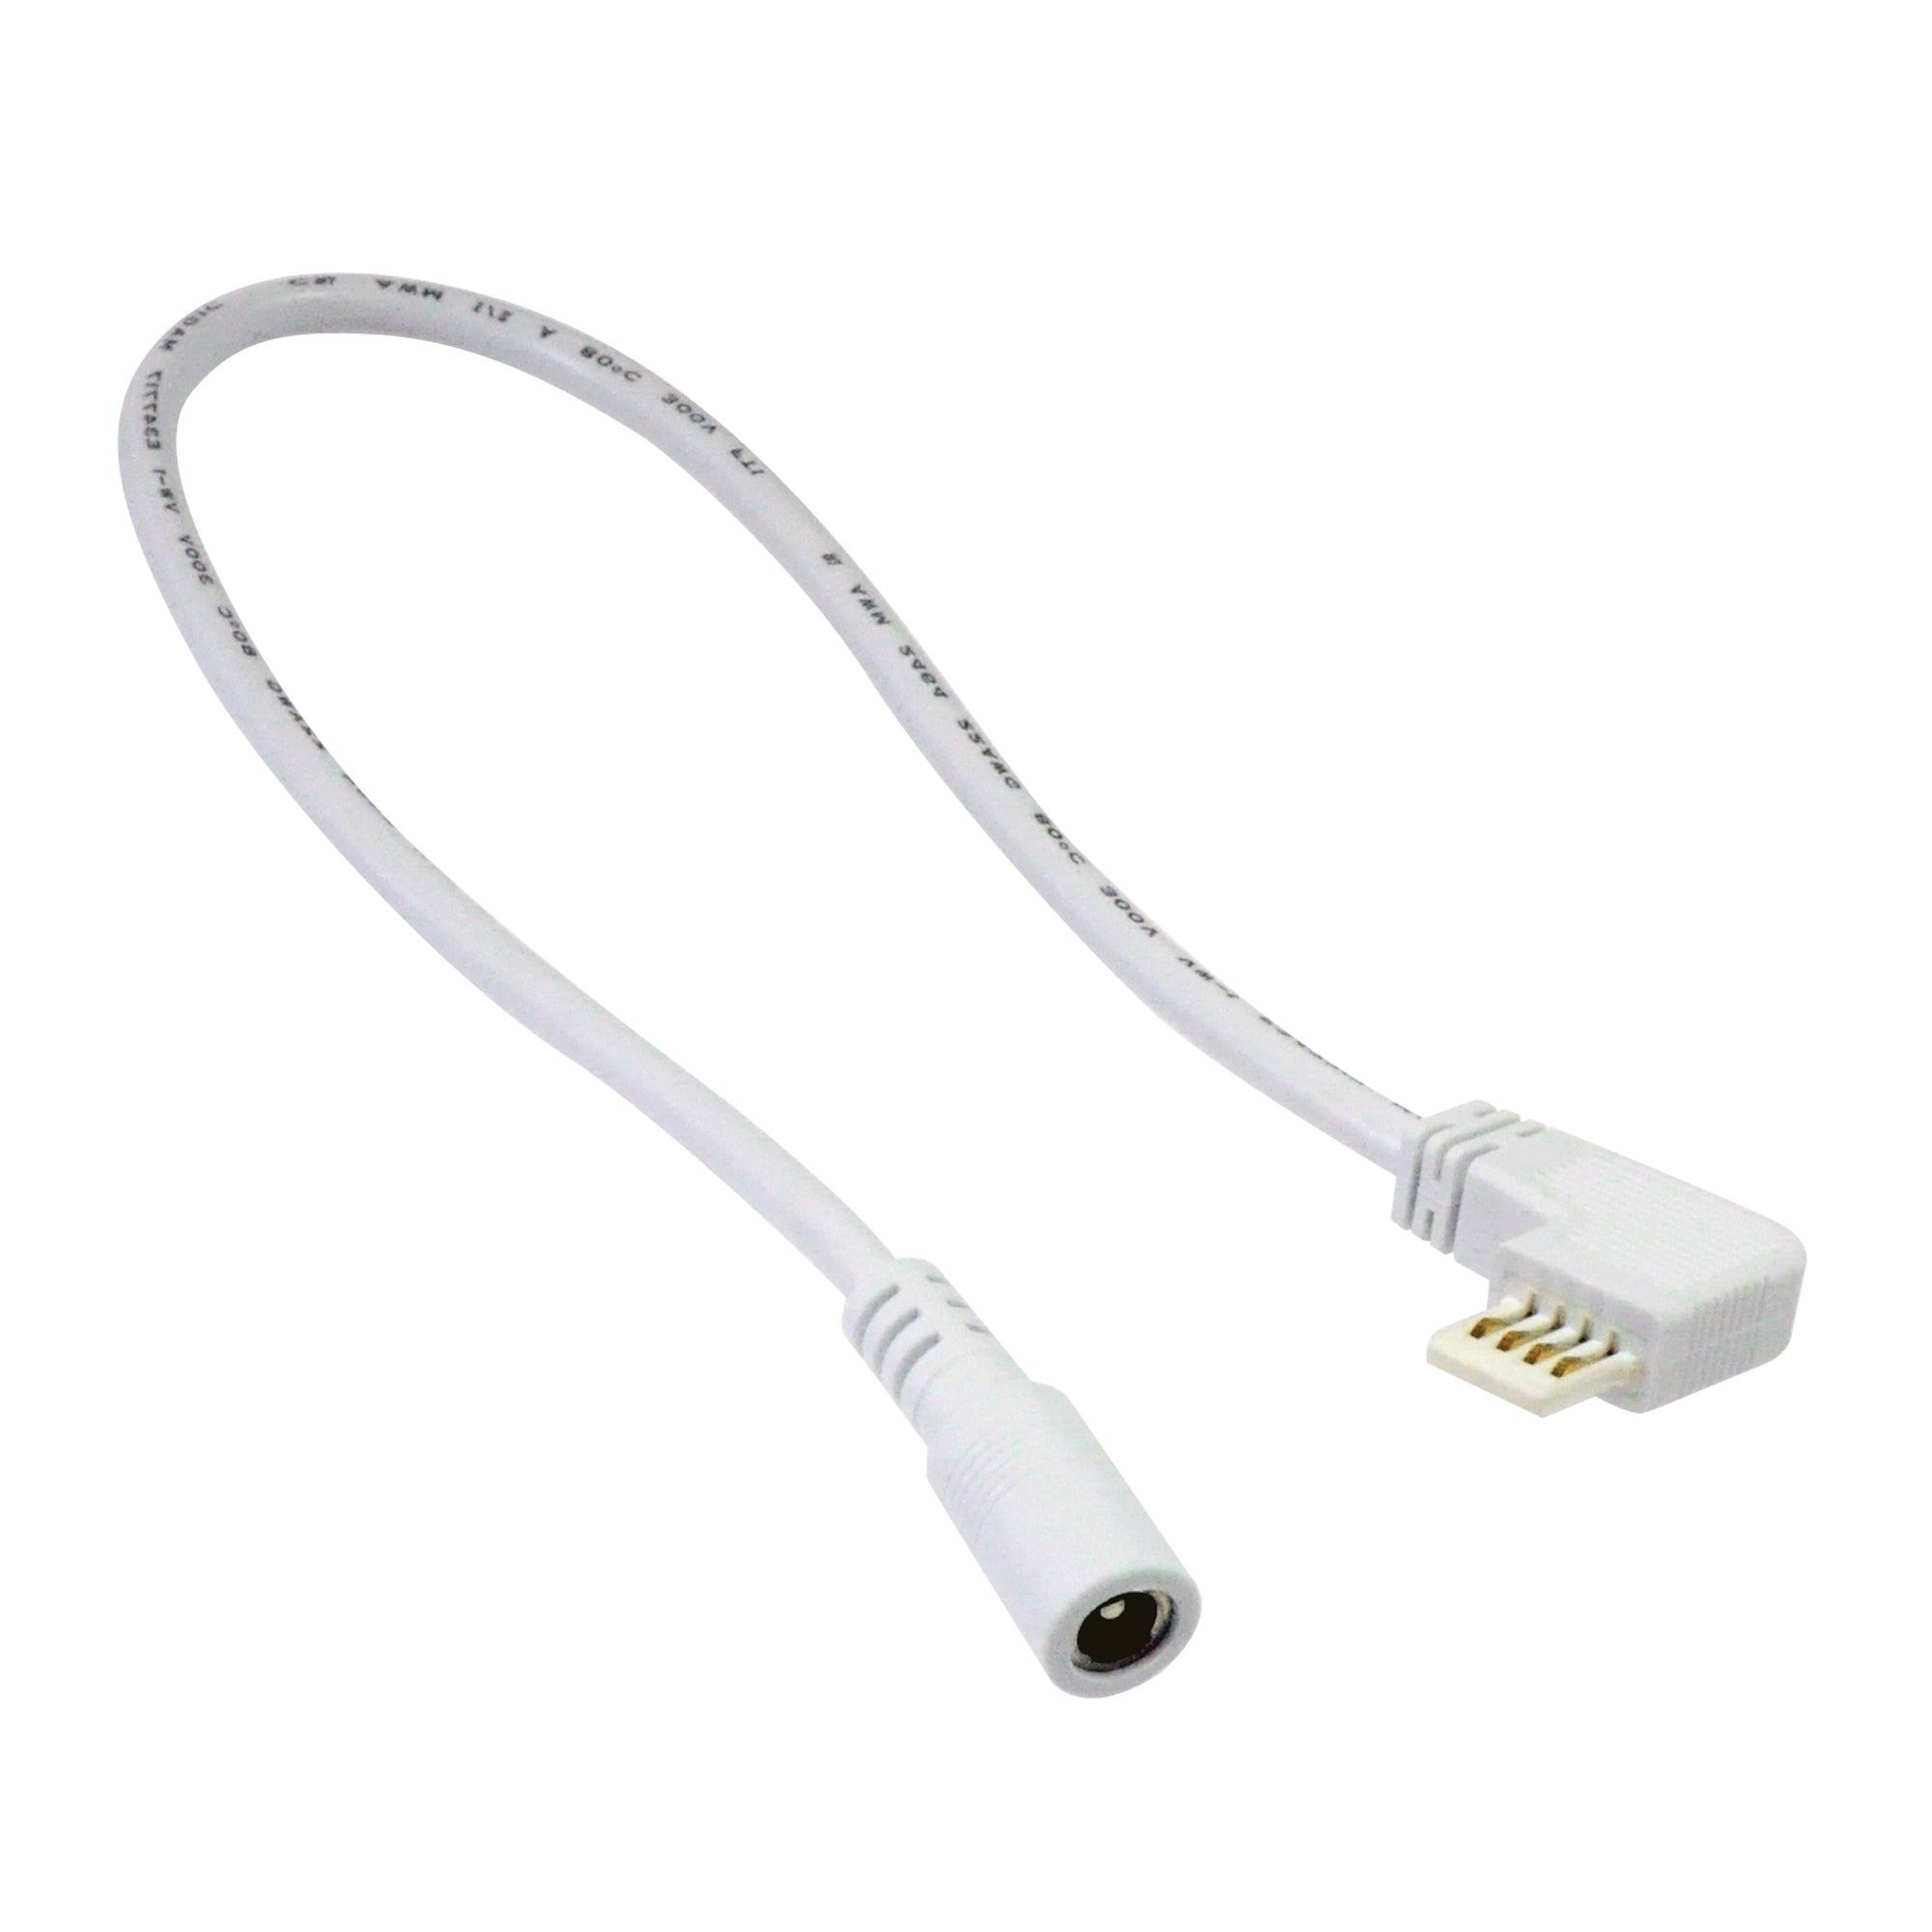 Nora Lighting NAL-807/72LW - Accent / Undercabinet - 72 Inch  Side Power Line Cable for Lightbar Silk, Left, White